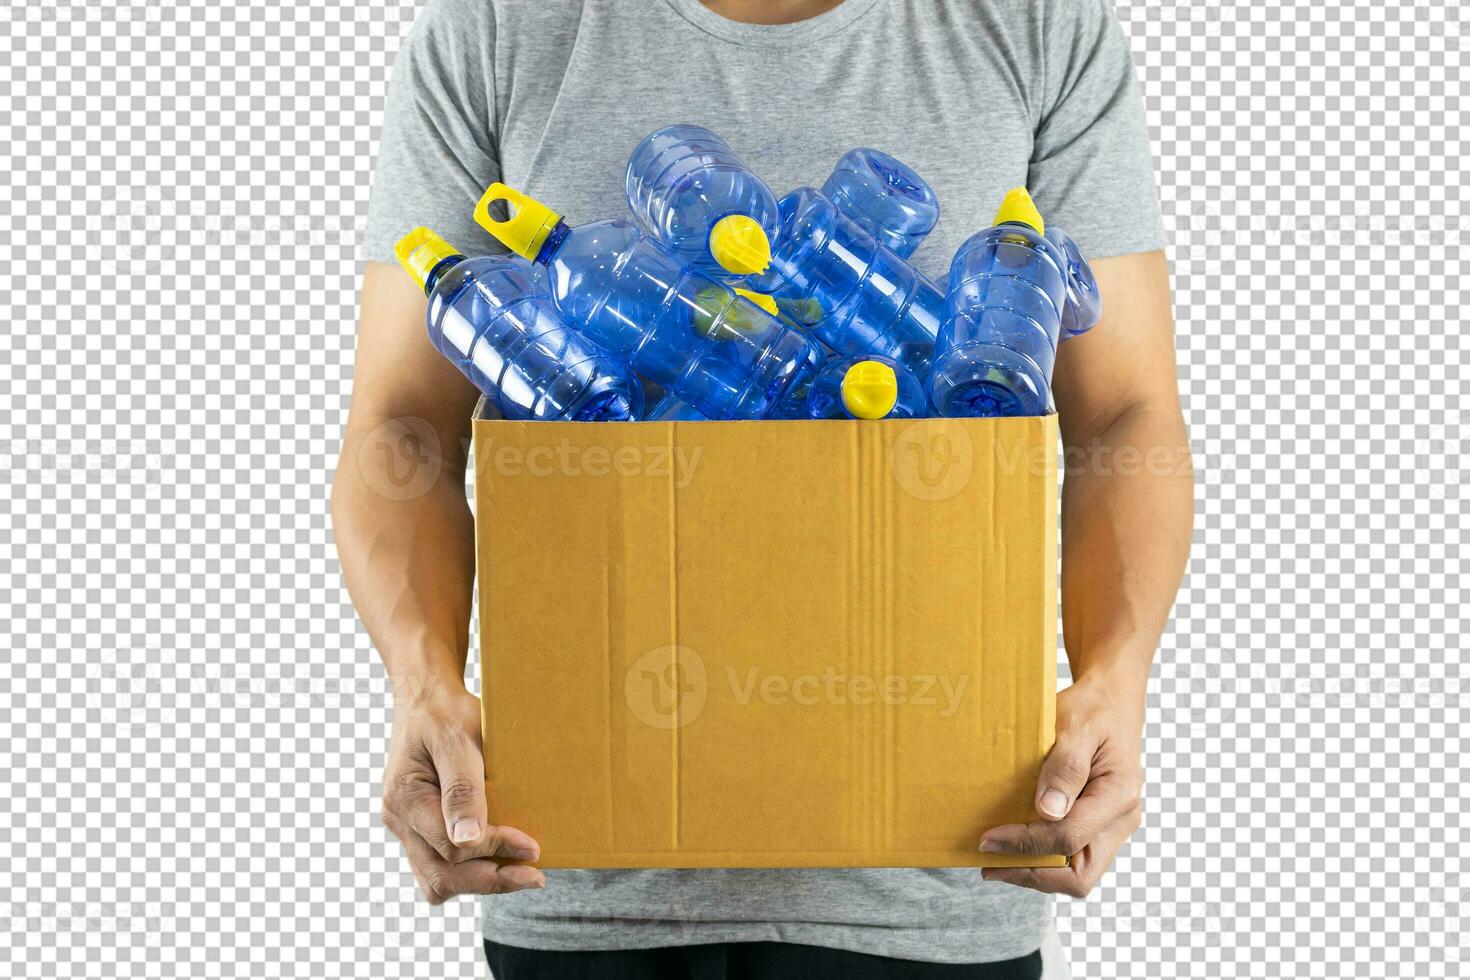 Man holding a box of recycled plastic bottles,psd file photo